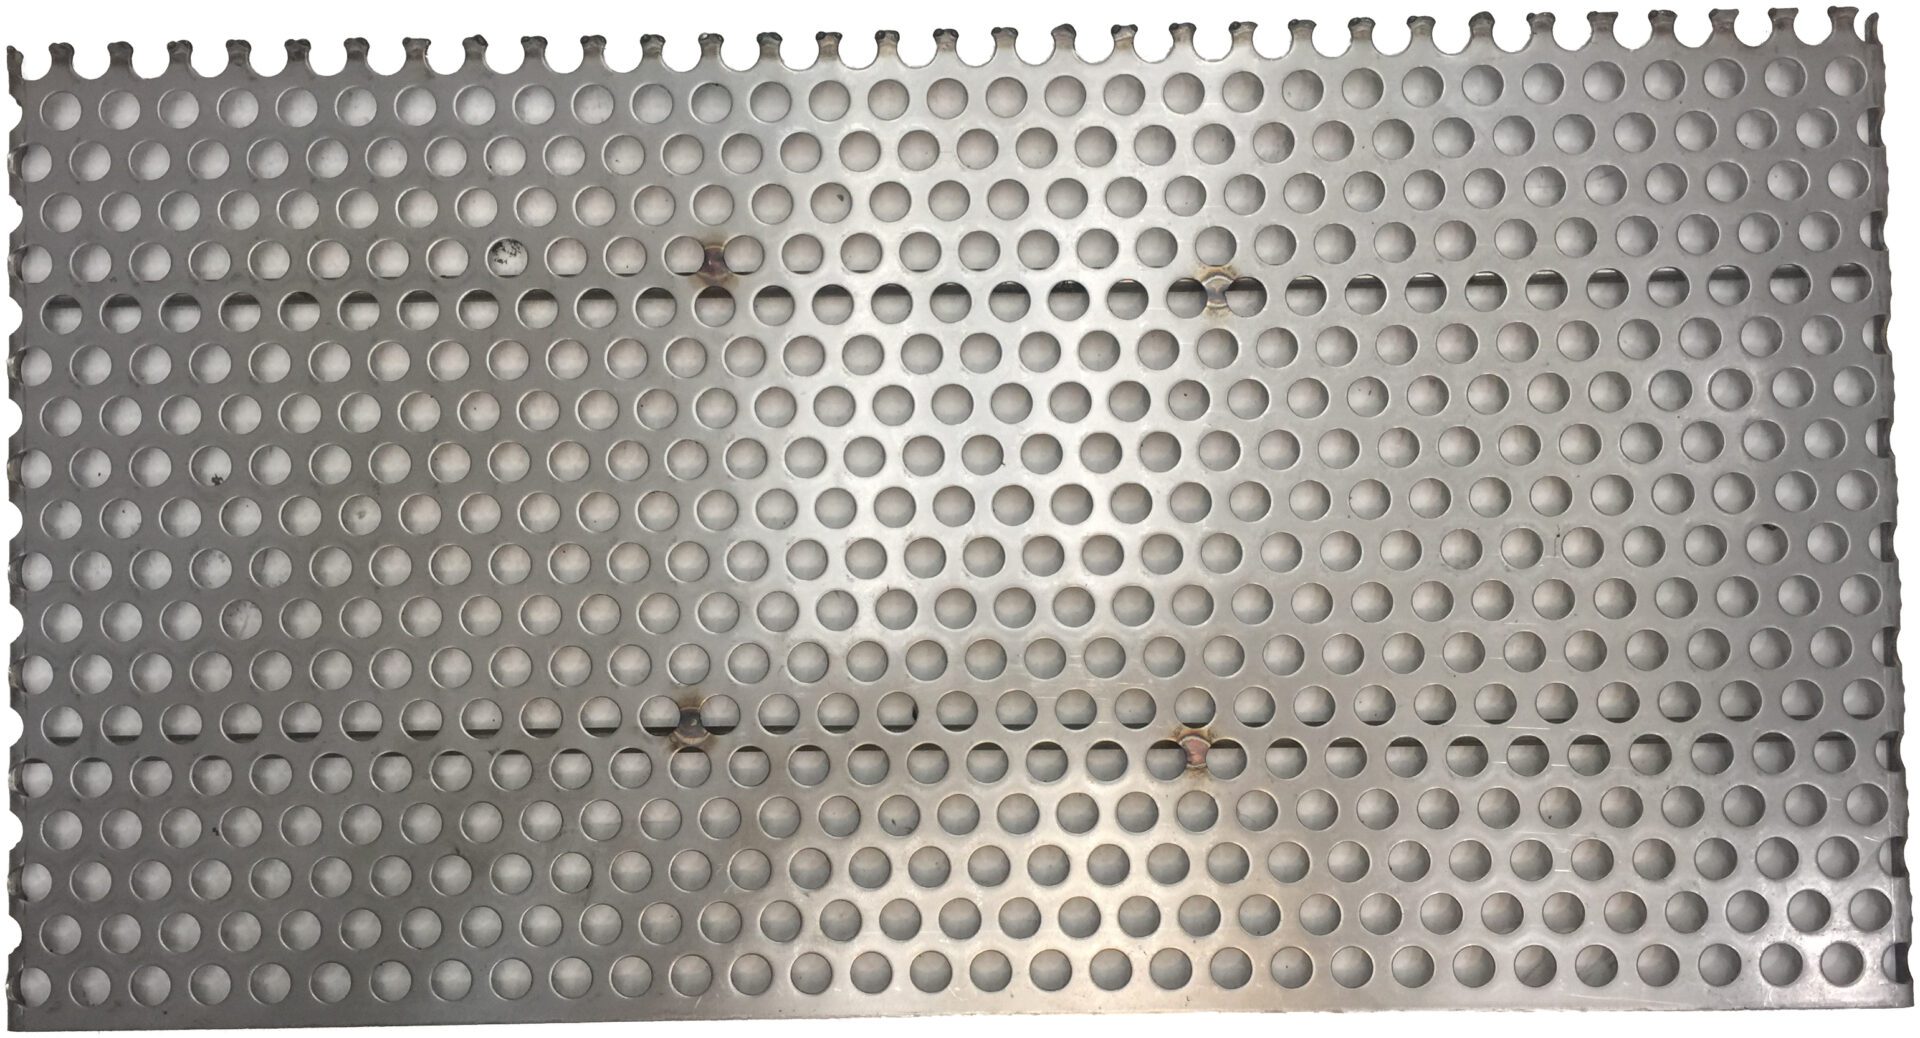 Stainless Steel Punch Plate with holes on a white background works with our 54 inch Dredge Ready Hopper Kit.